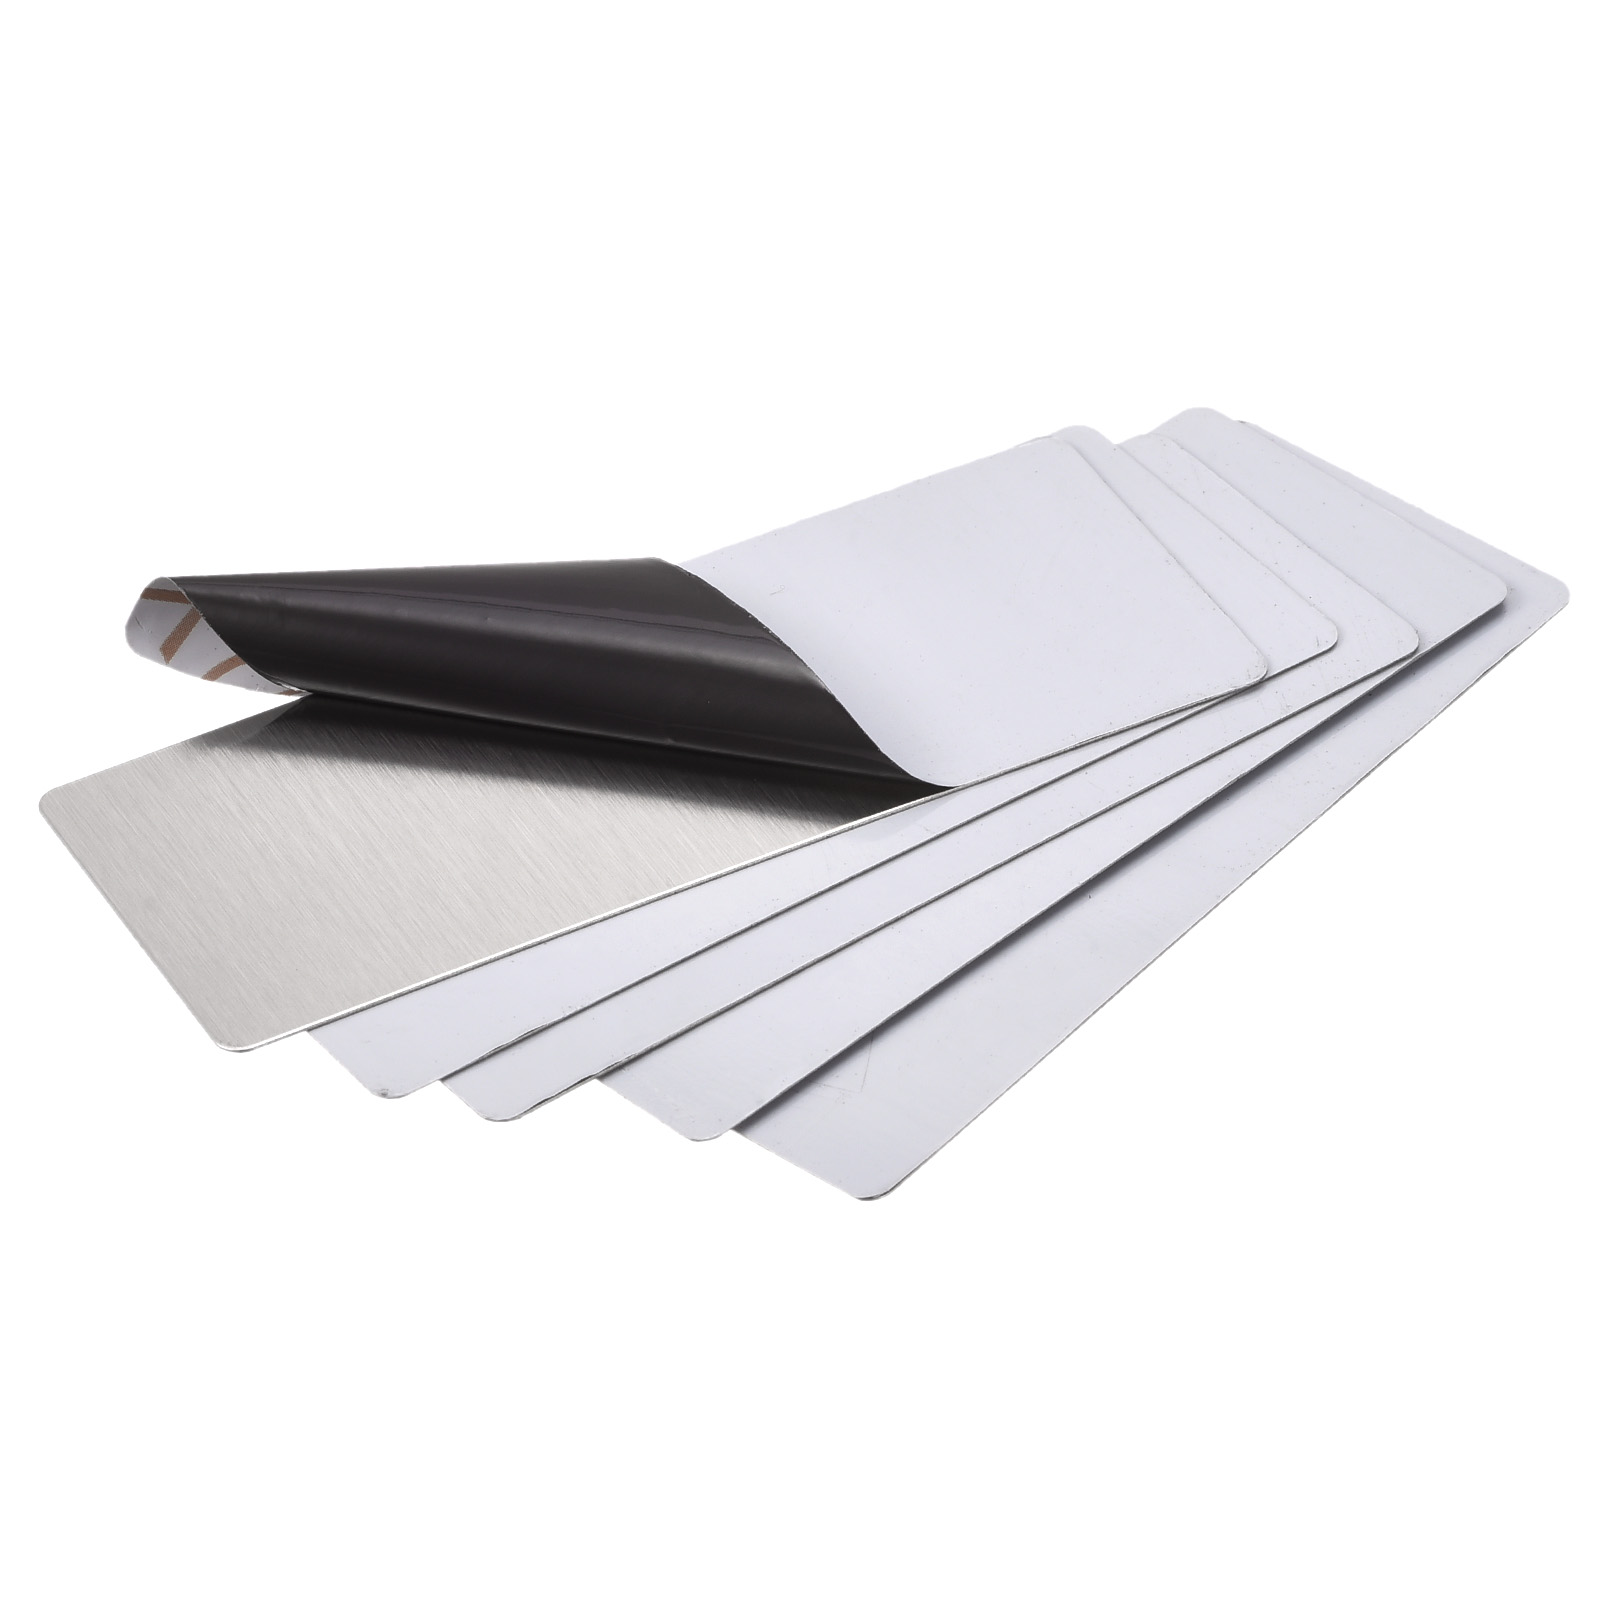 Uxcell 80x30x0.4mm 201 Stainless Steel Brushed Blank Metal Card Silver Tone 10 Pack - image 1 of 6